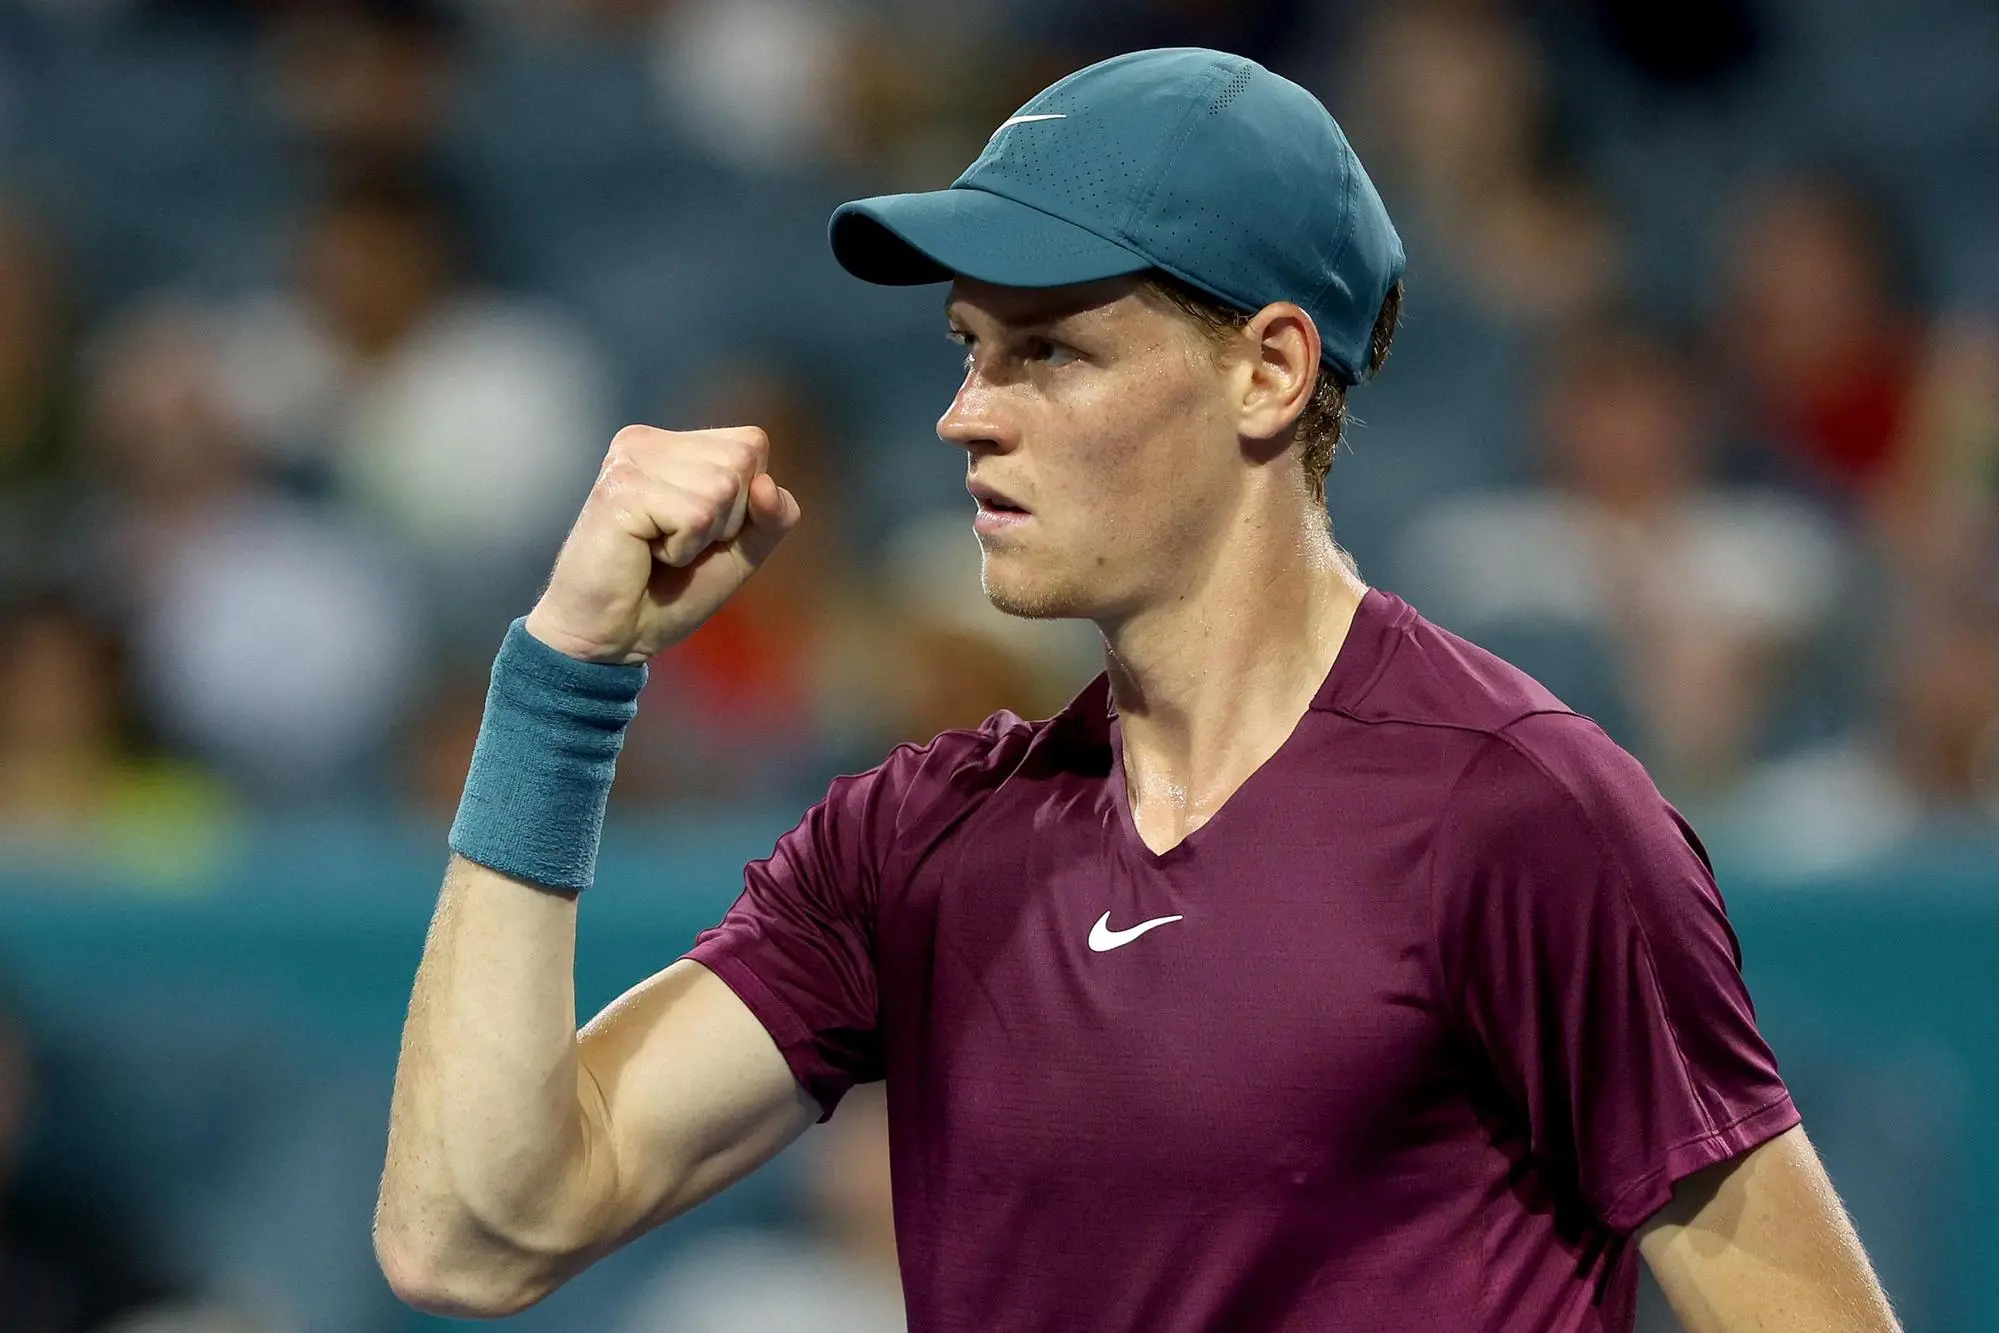 MIAMI GARDENS, FLORIDA - MARCH 31: Jannik Sinner of Italy celebrateswhile playing Carlos Alcaraz of Spain during the semifinals of the Miami Open at Hard Rock Stadium on March 31, 2023 in Miami Gardens, Florida. Matthew Stockman/Getty Images/AFP (Photo by MATTHEW STOCKMAN / GETTY IMAGES NORTH AMERICA / Getty Images via AFP)